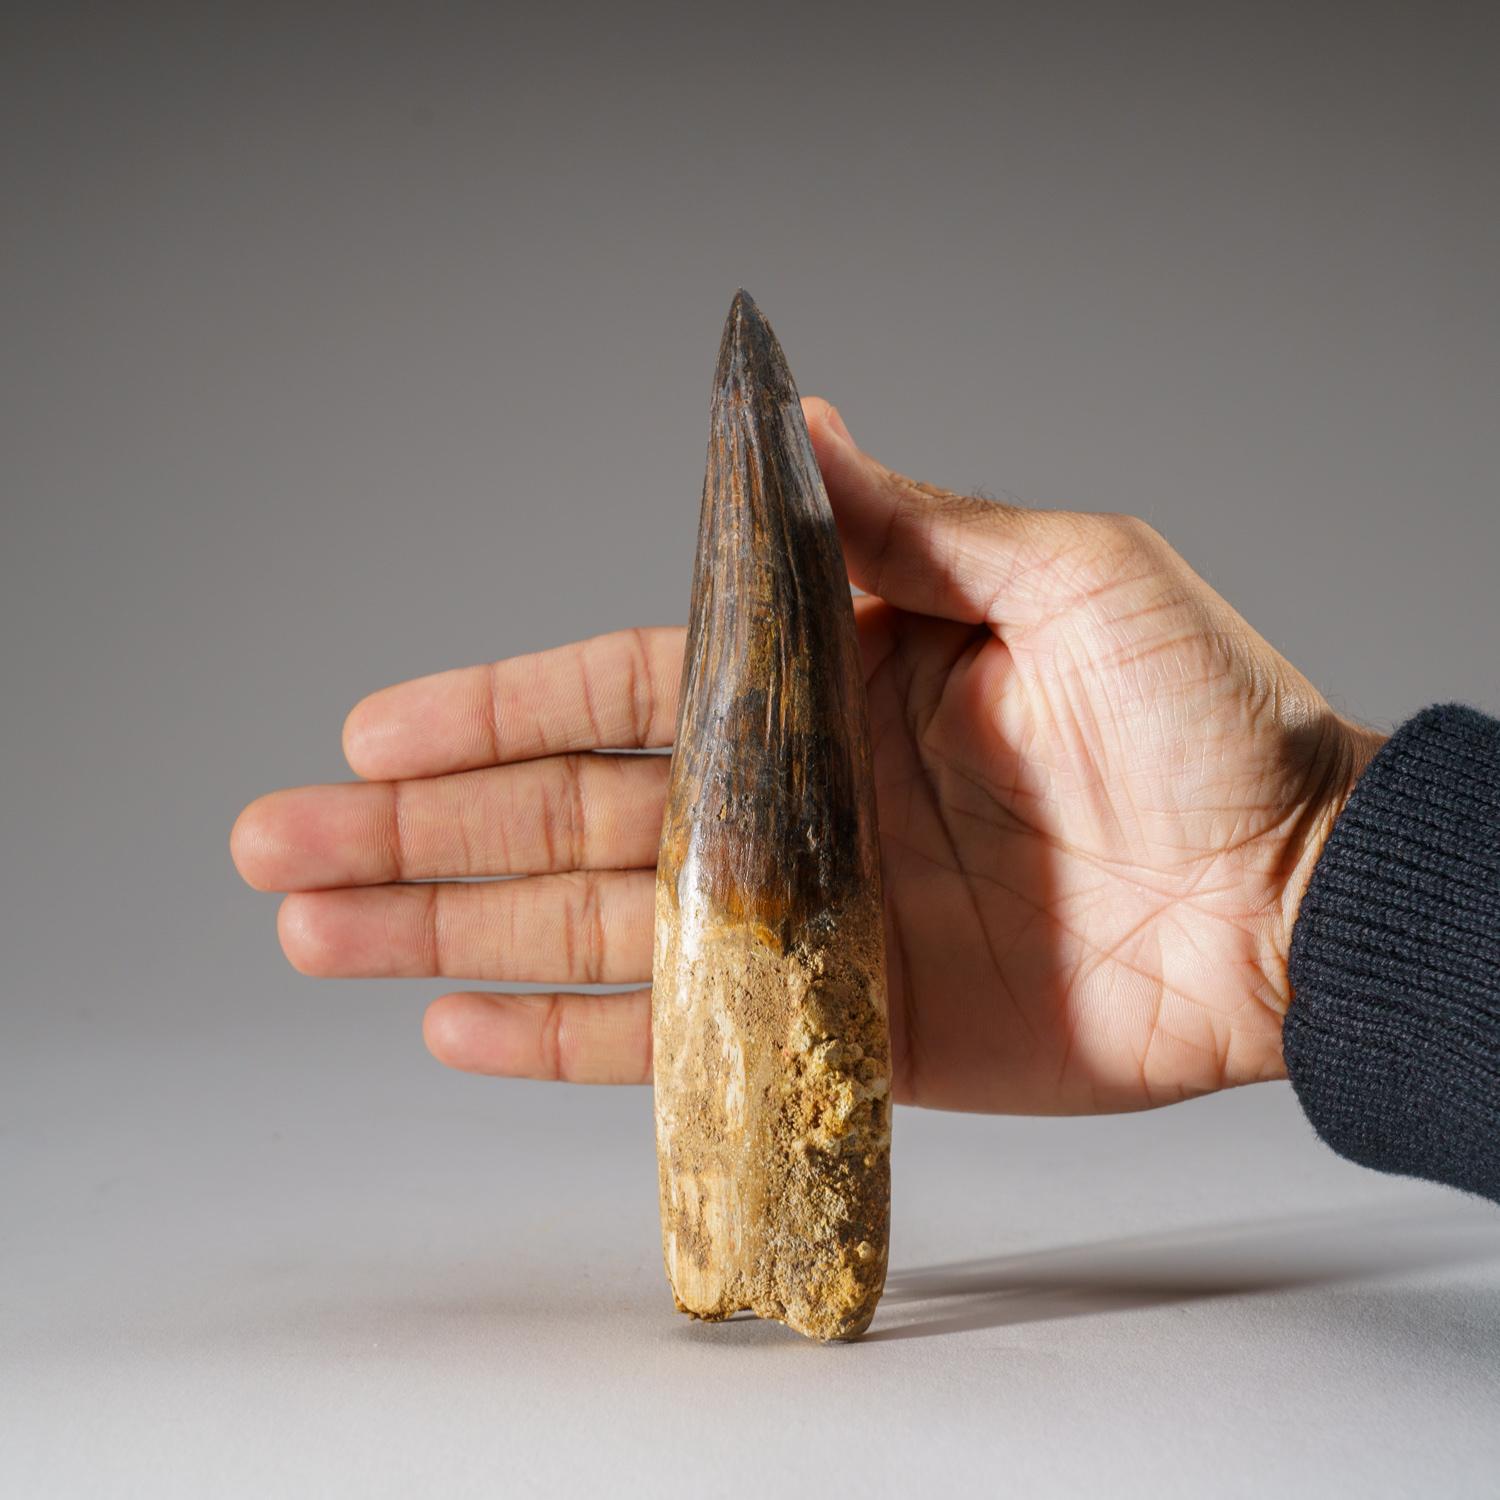 This huge, Museum-quality Mesosaurus tooth is genuine, completely intact with no repairs and in pristine condition. This incredible specimen includes a display box for preservation and display purposes. Mesosaurus (meaning 